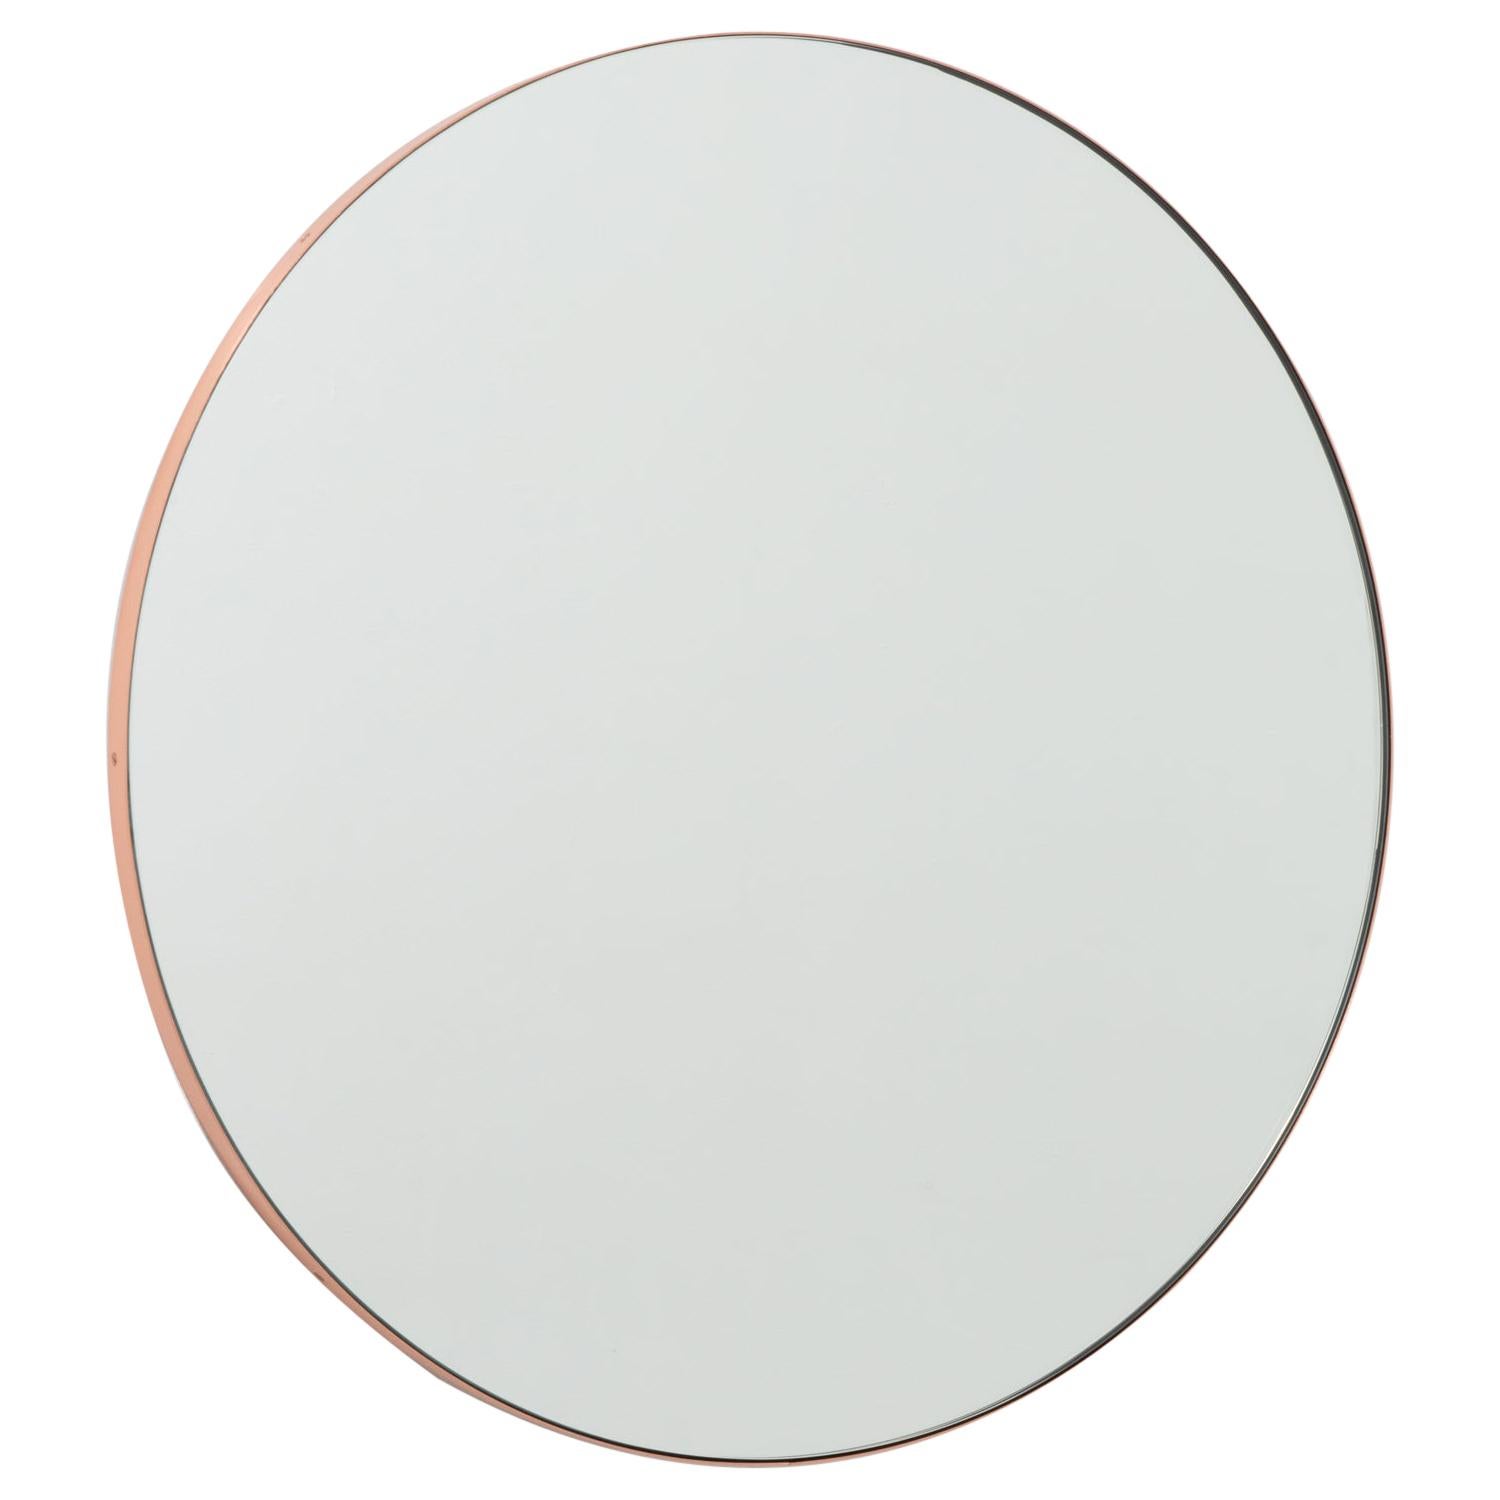 In Stock Orbis Round Handcrafted Mirror with Copper Frame, Medium